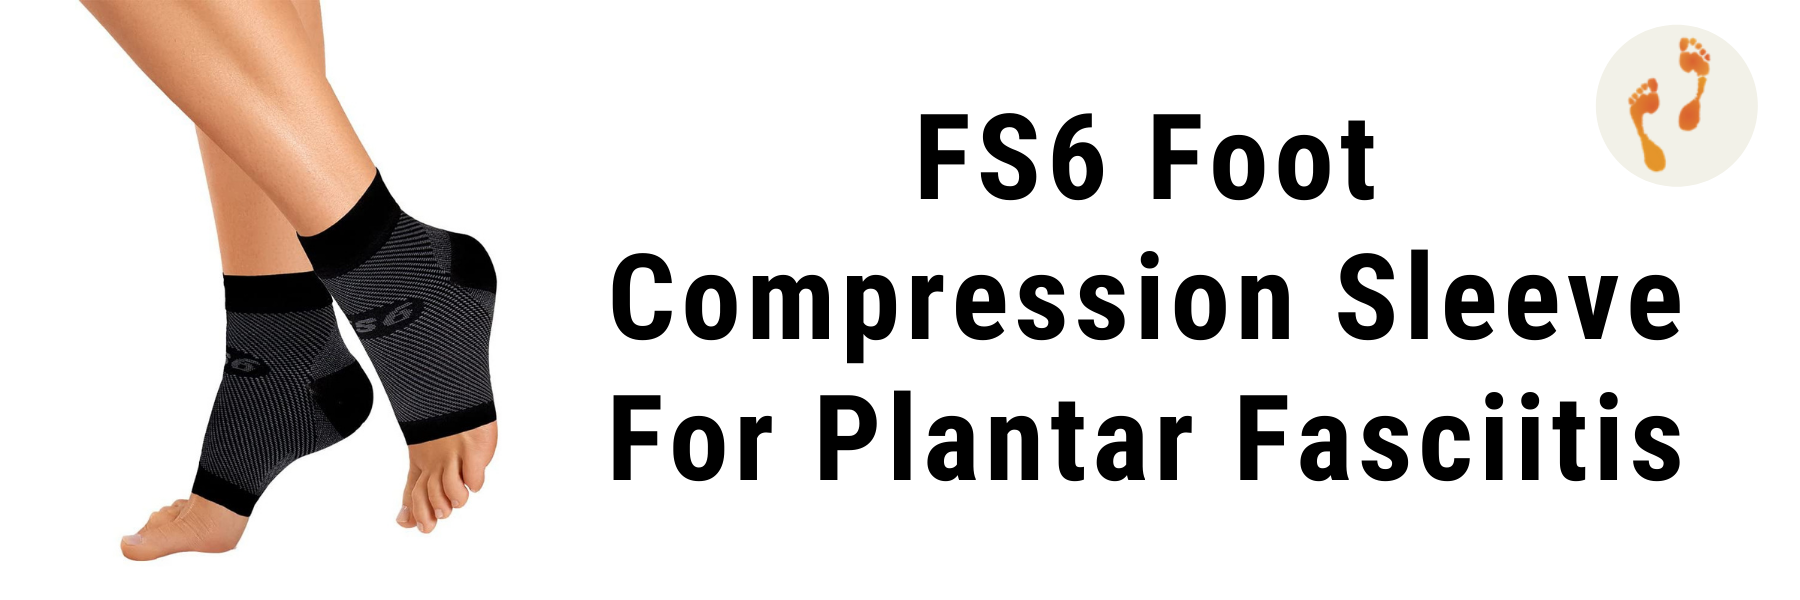 How Can Compression Socks Help With Plantar Fasciitis?